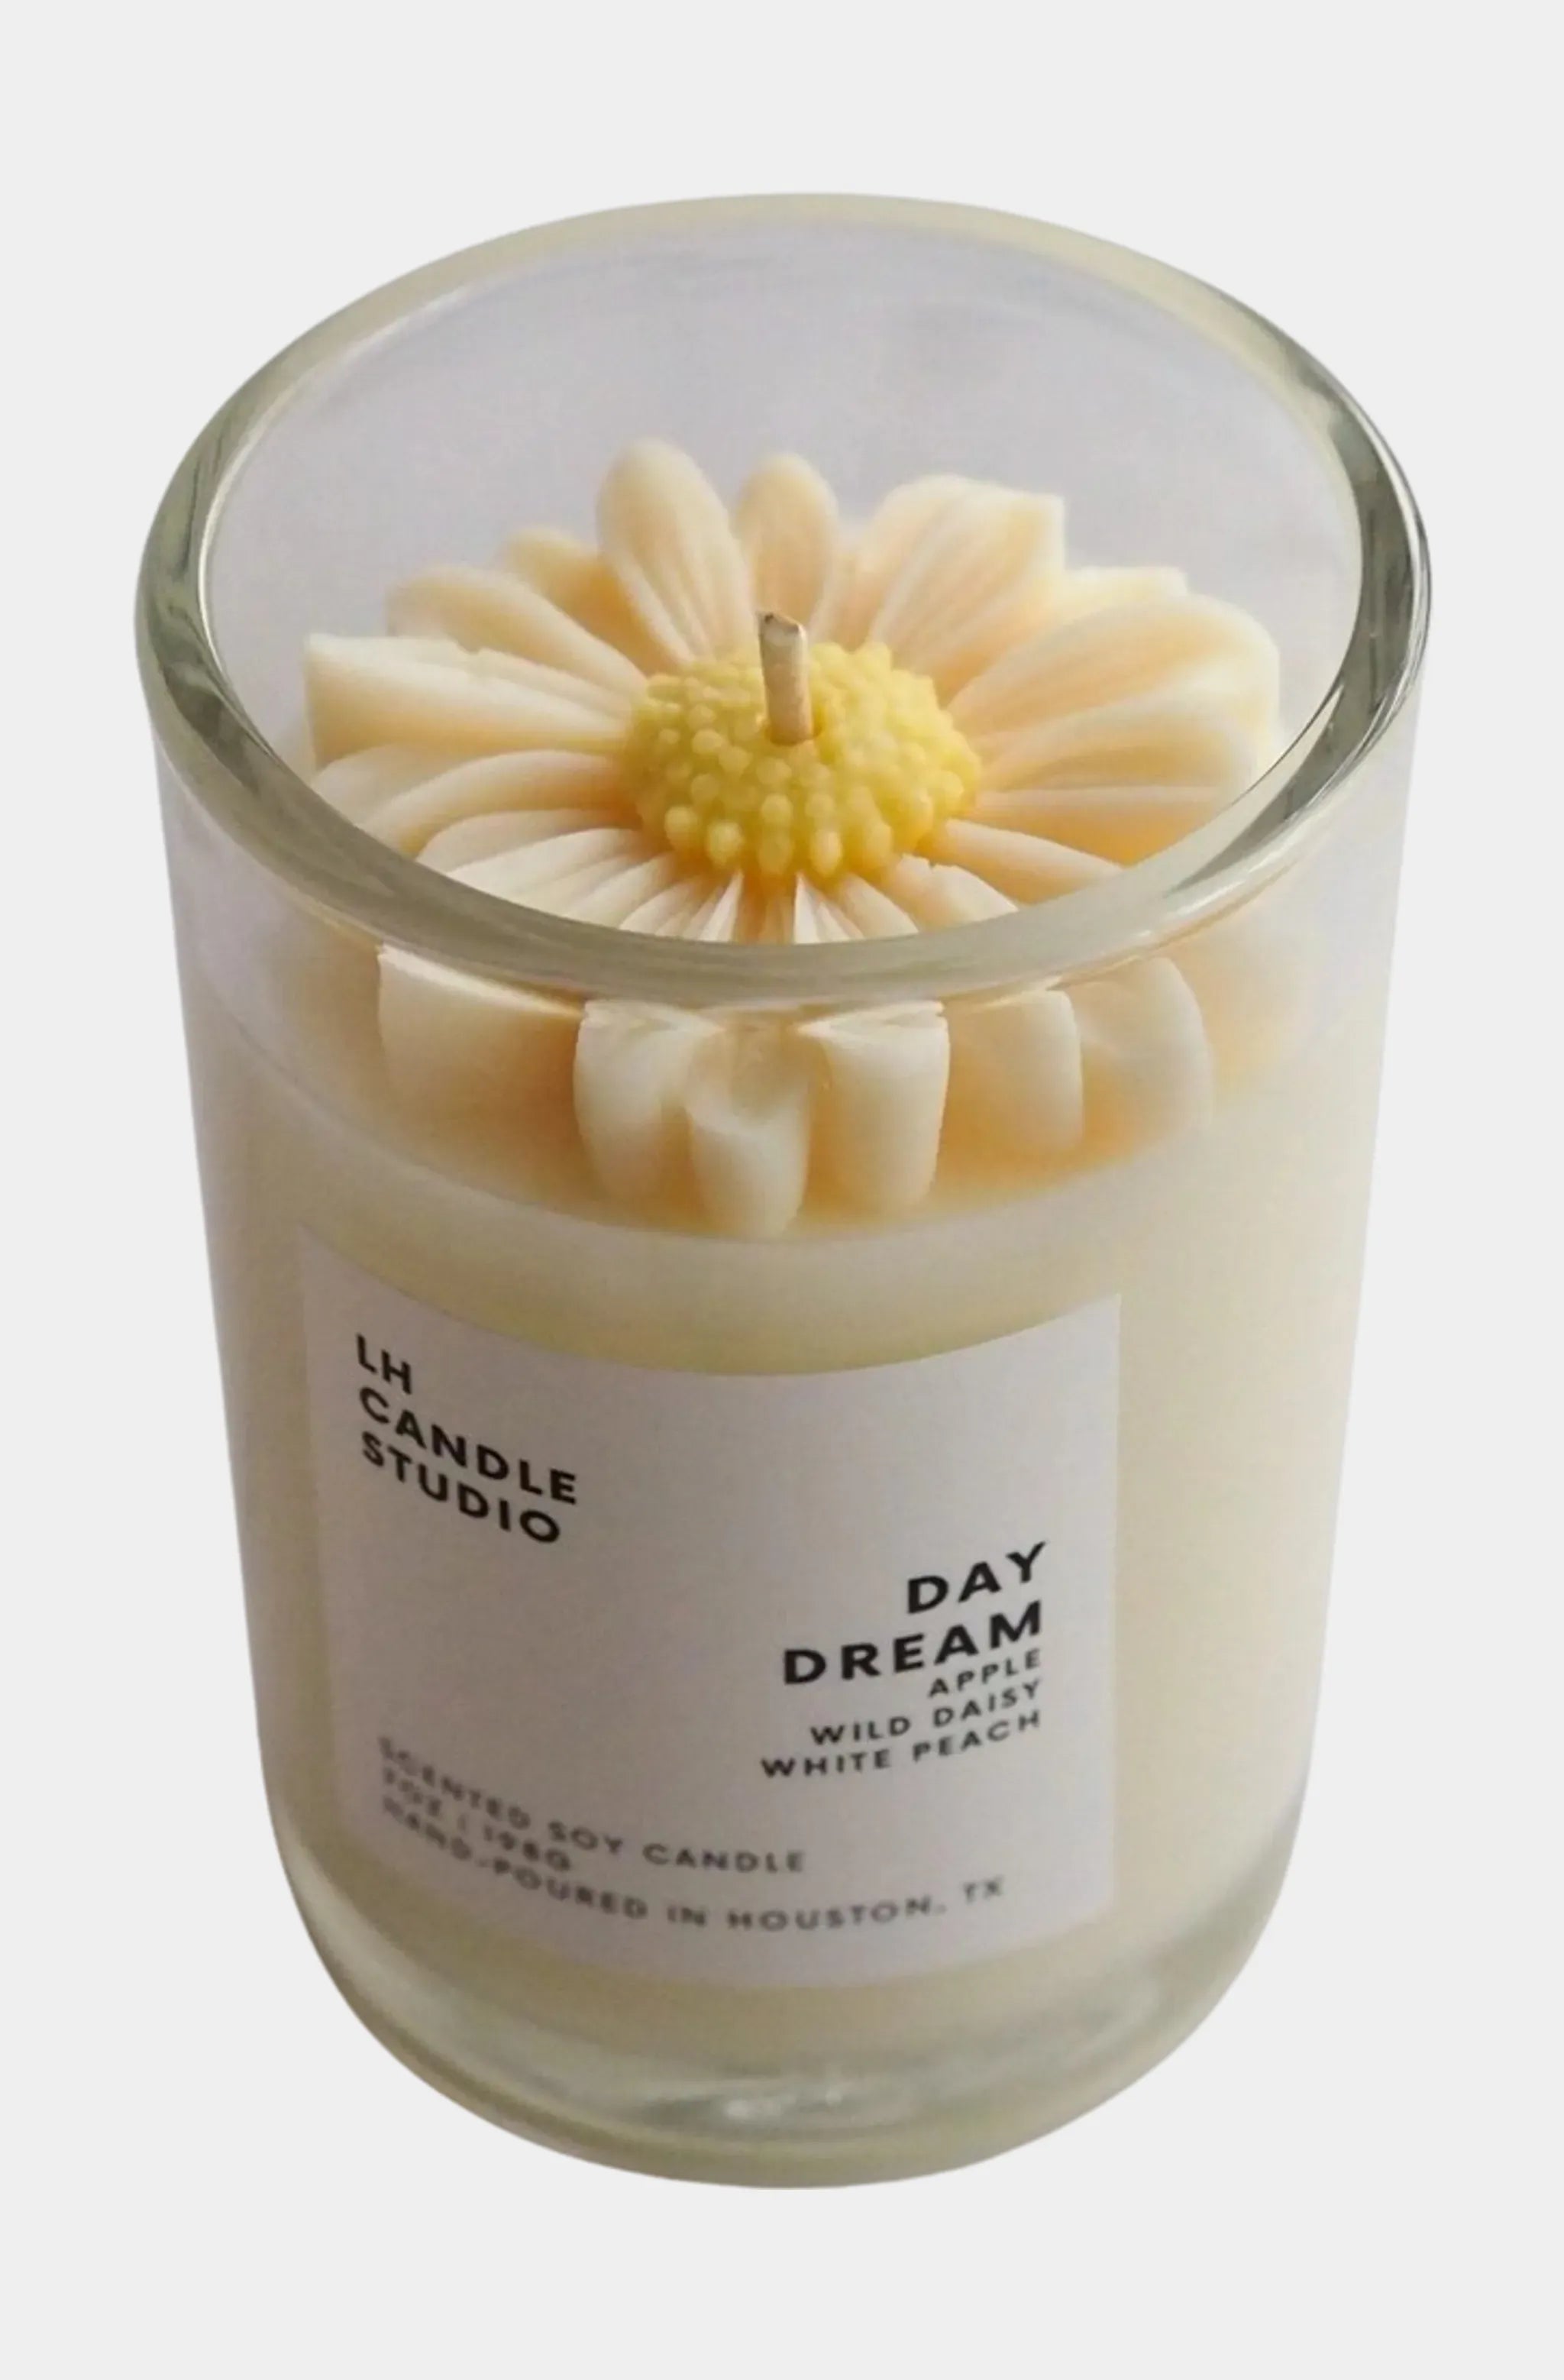 Day Dream 7oz. Scented Soy Candle